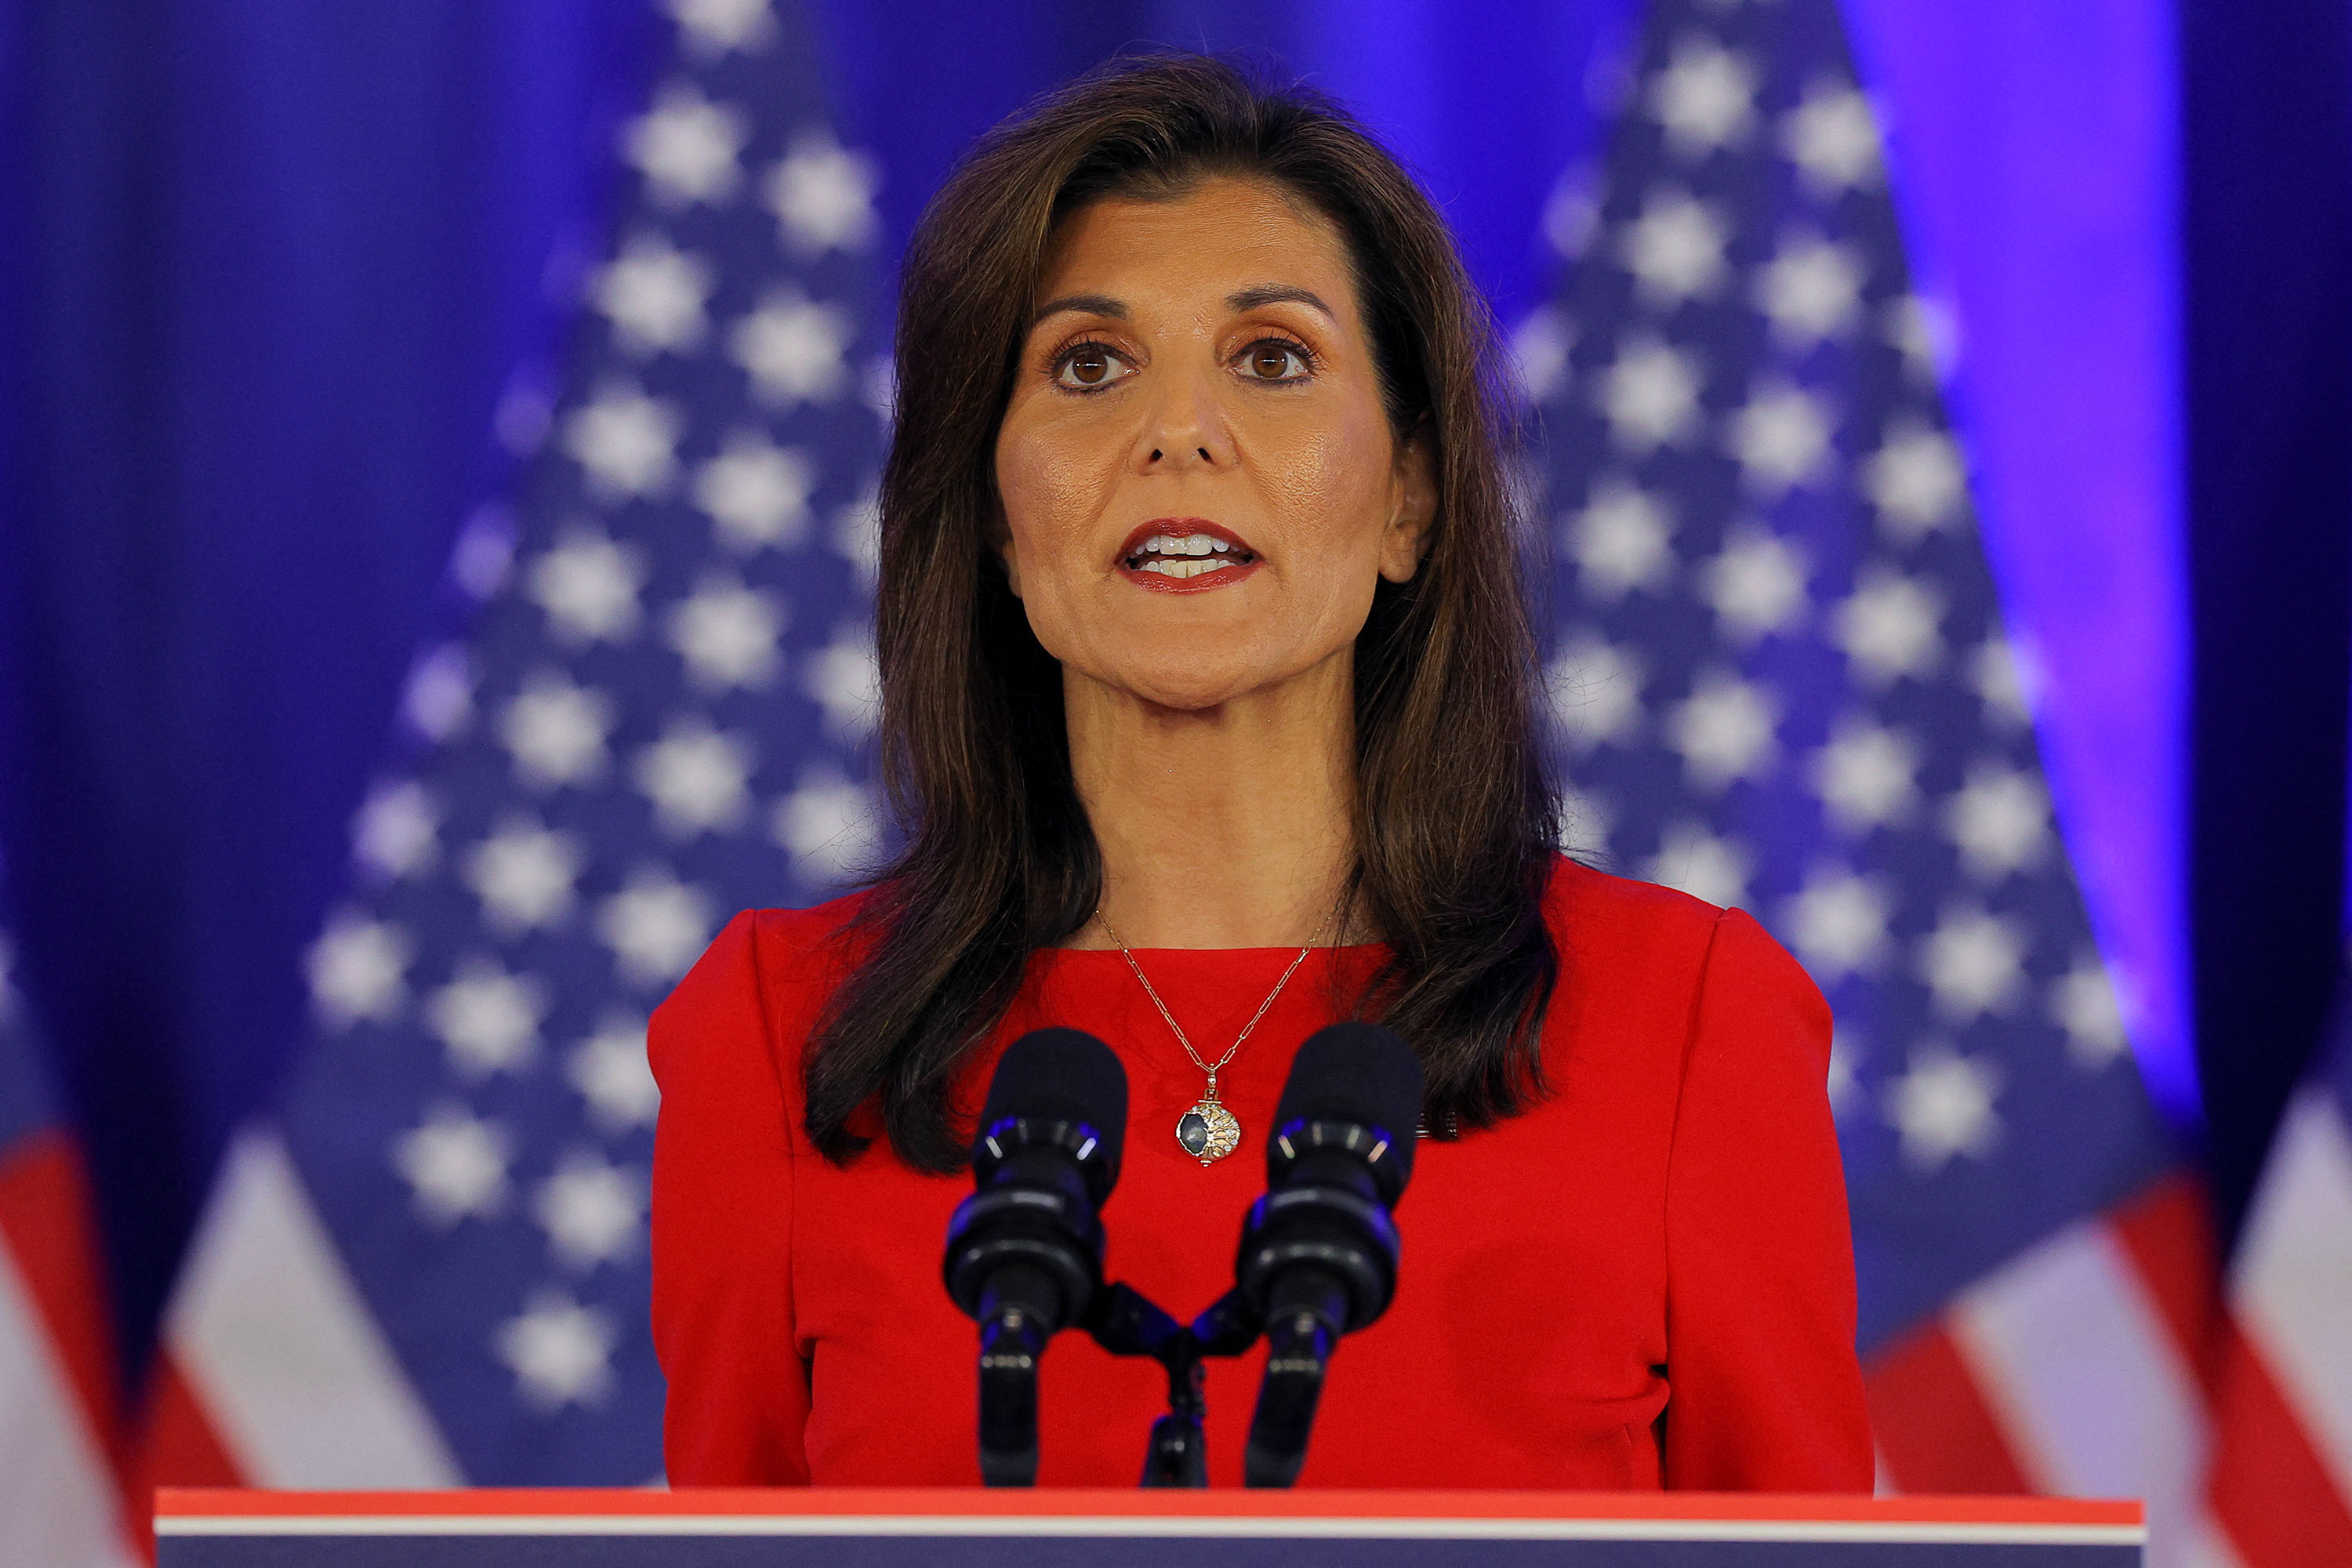 Biden campaign makes an appeal to Haley supporters